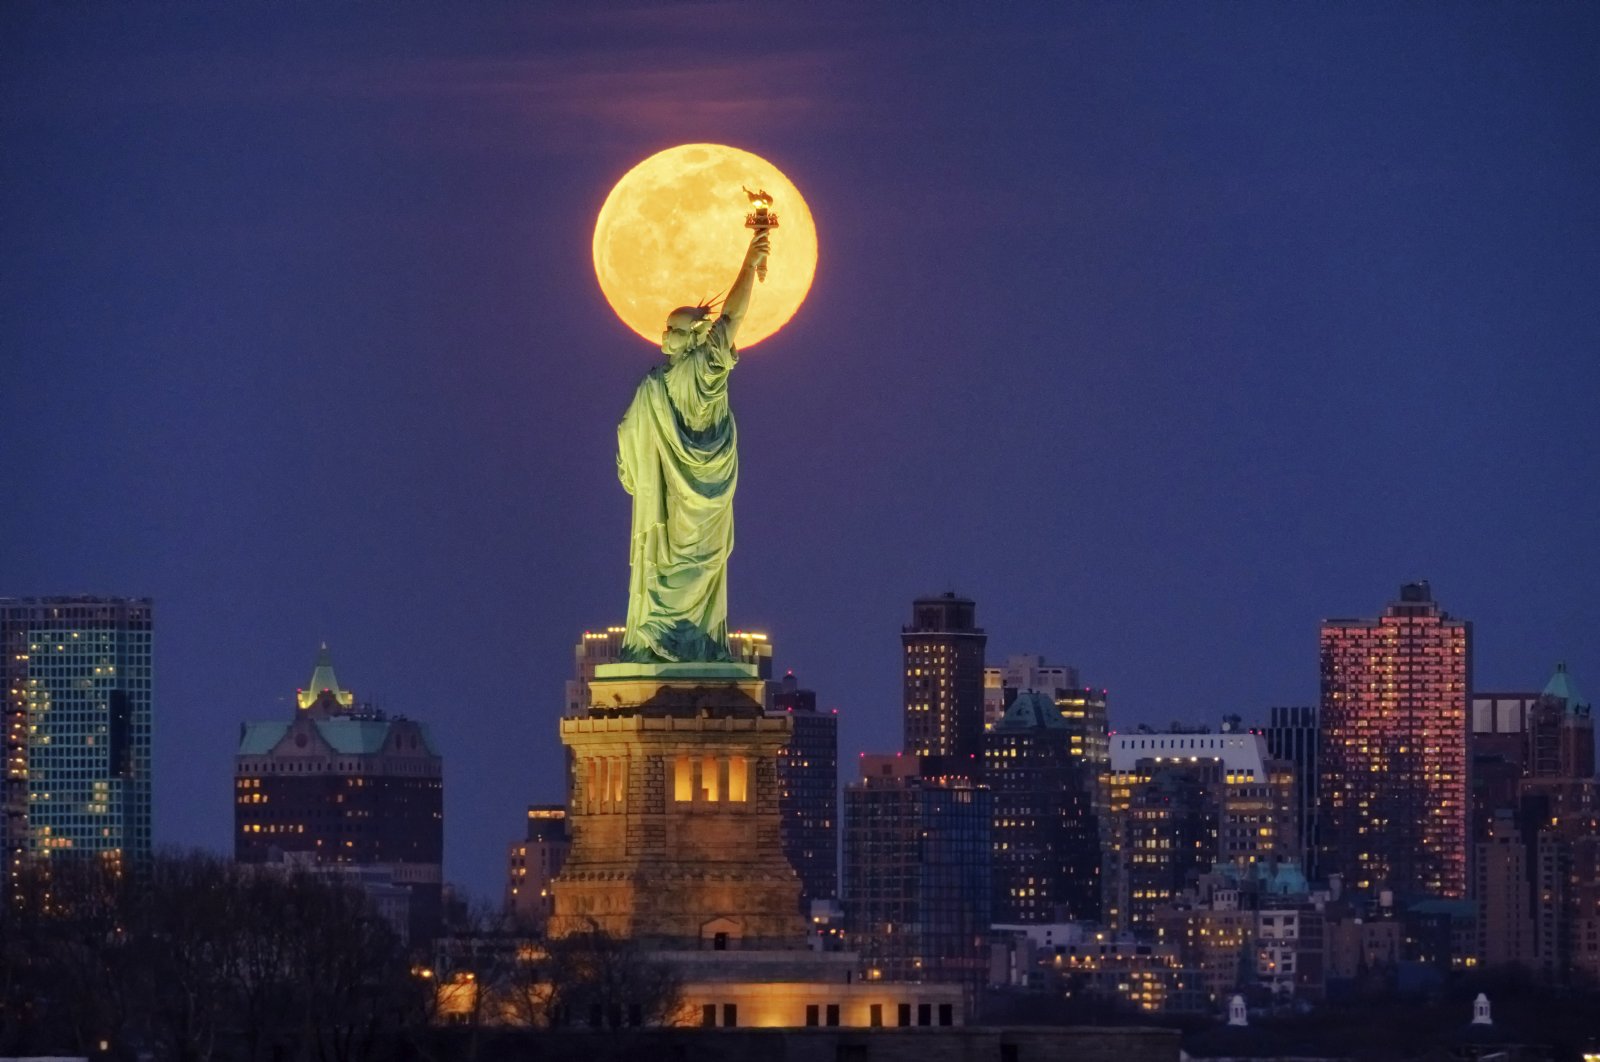 The full moon rises behind the Statue of Liberty in New York, March 9, 2020. (AP Photo)